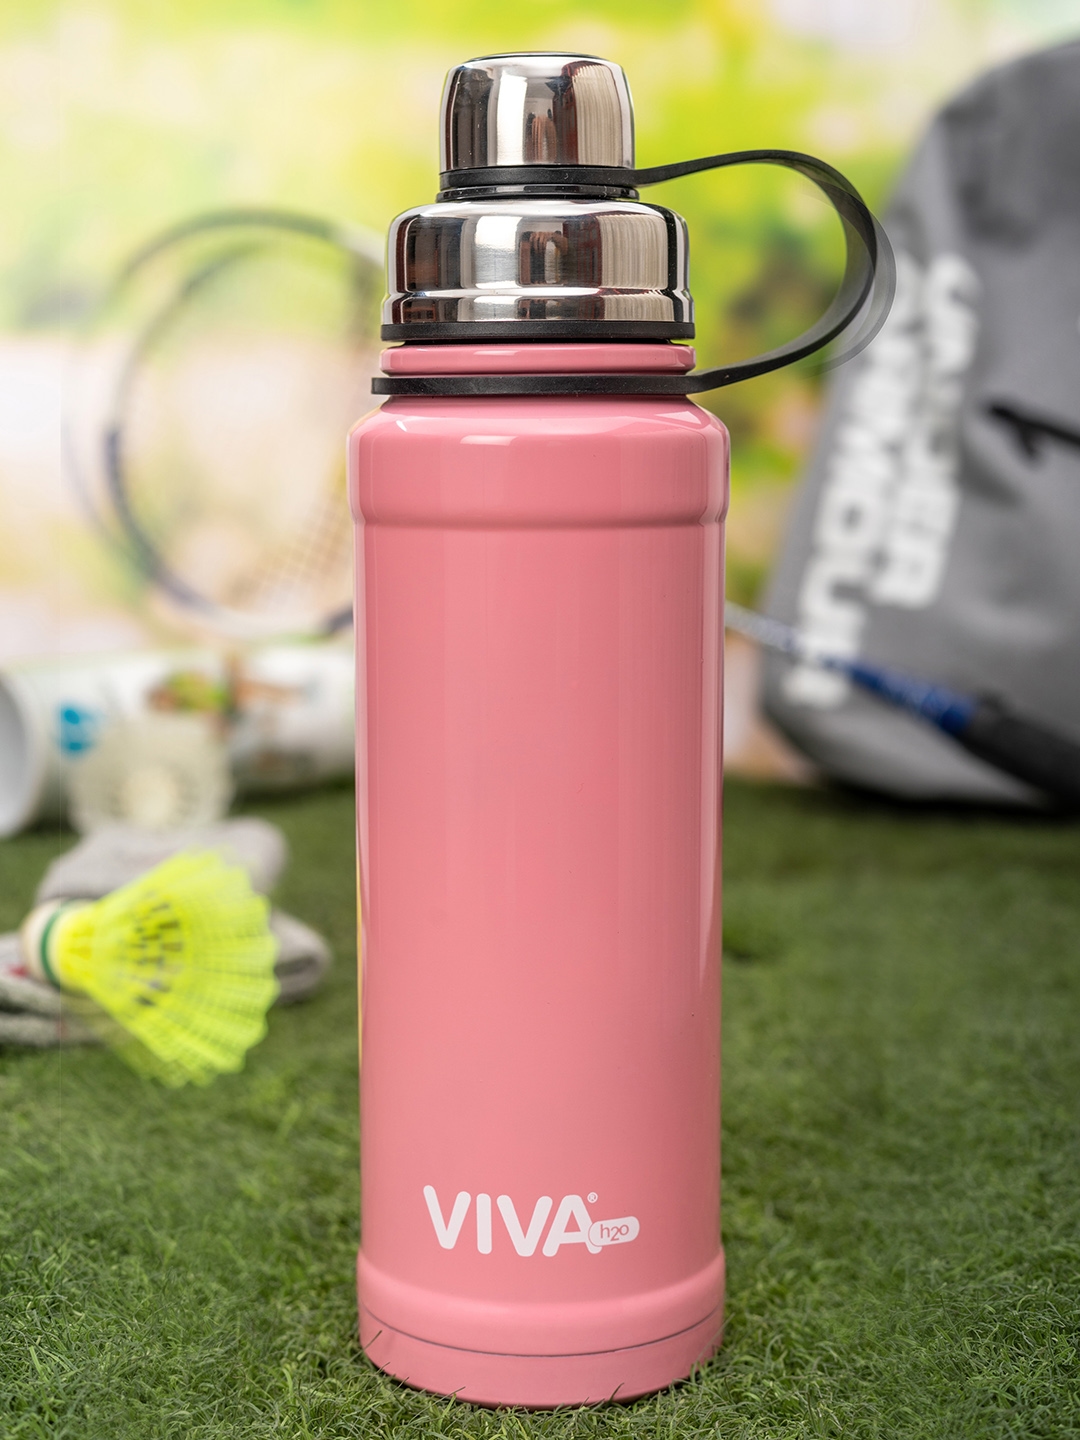 VIVA h2o Unisex Pink Solid Double Wall Stainless Steel Vaccum Insulated Water Bottle